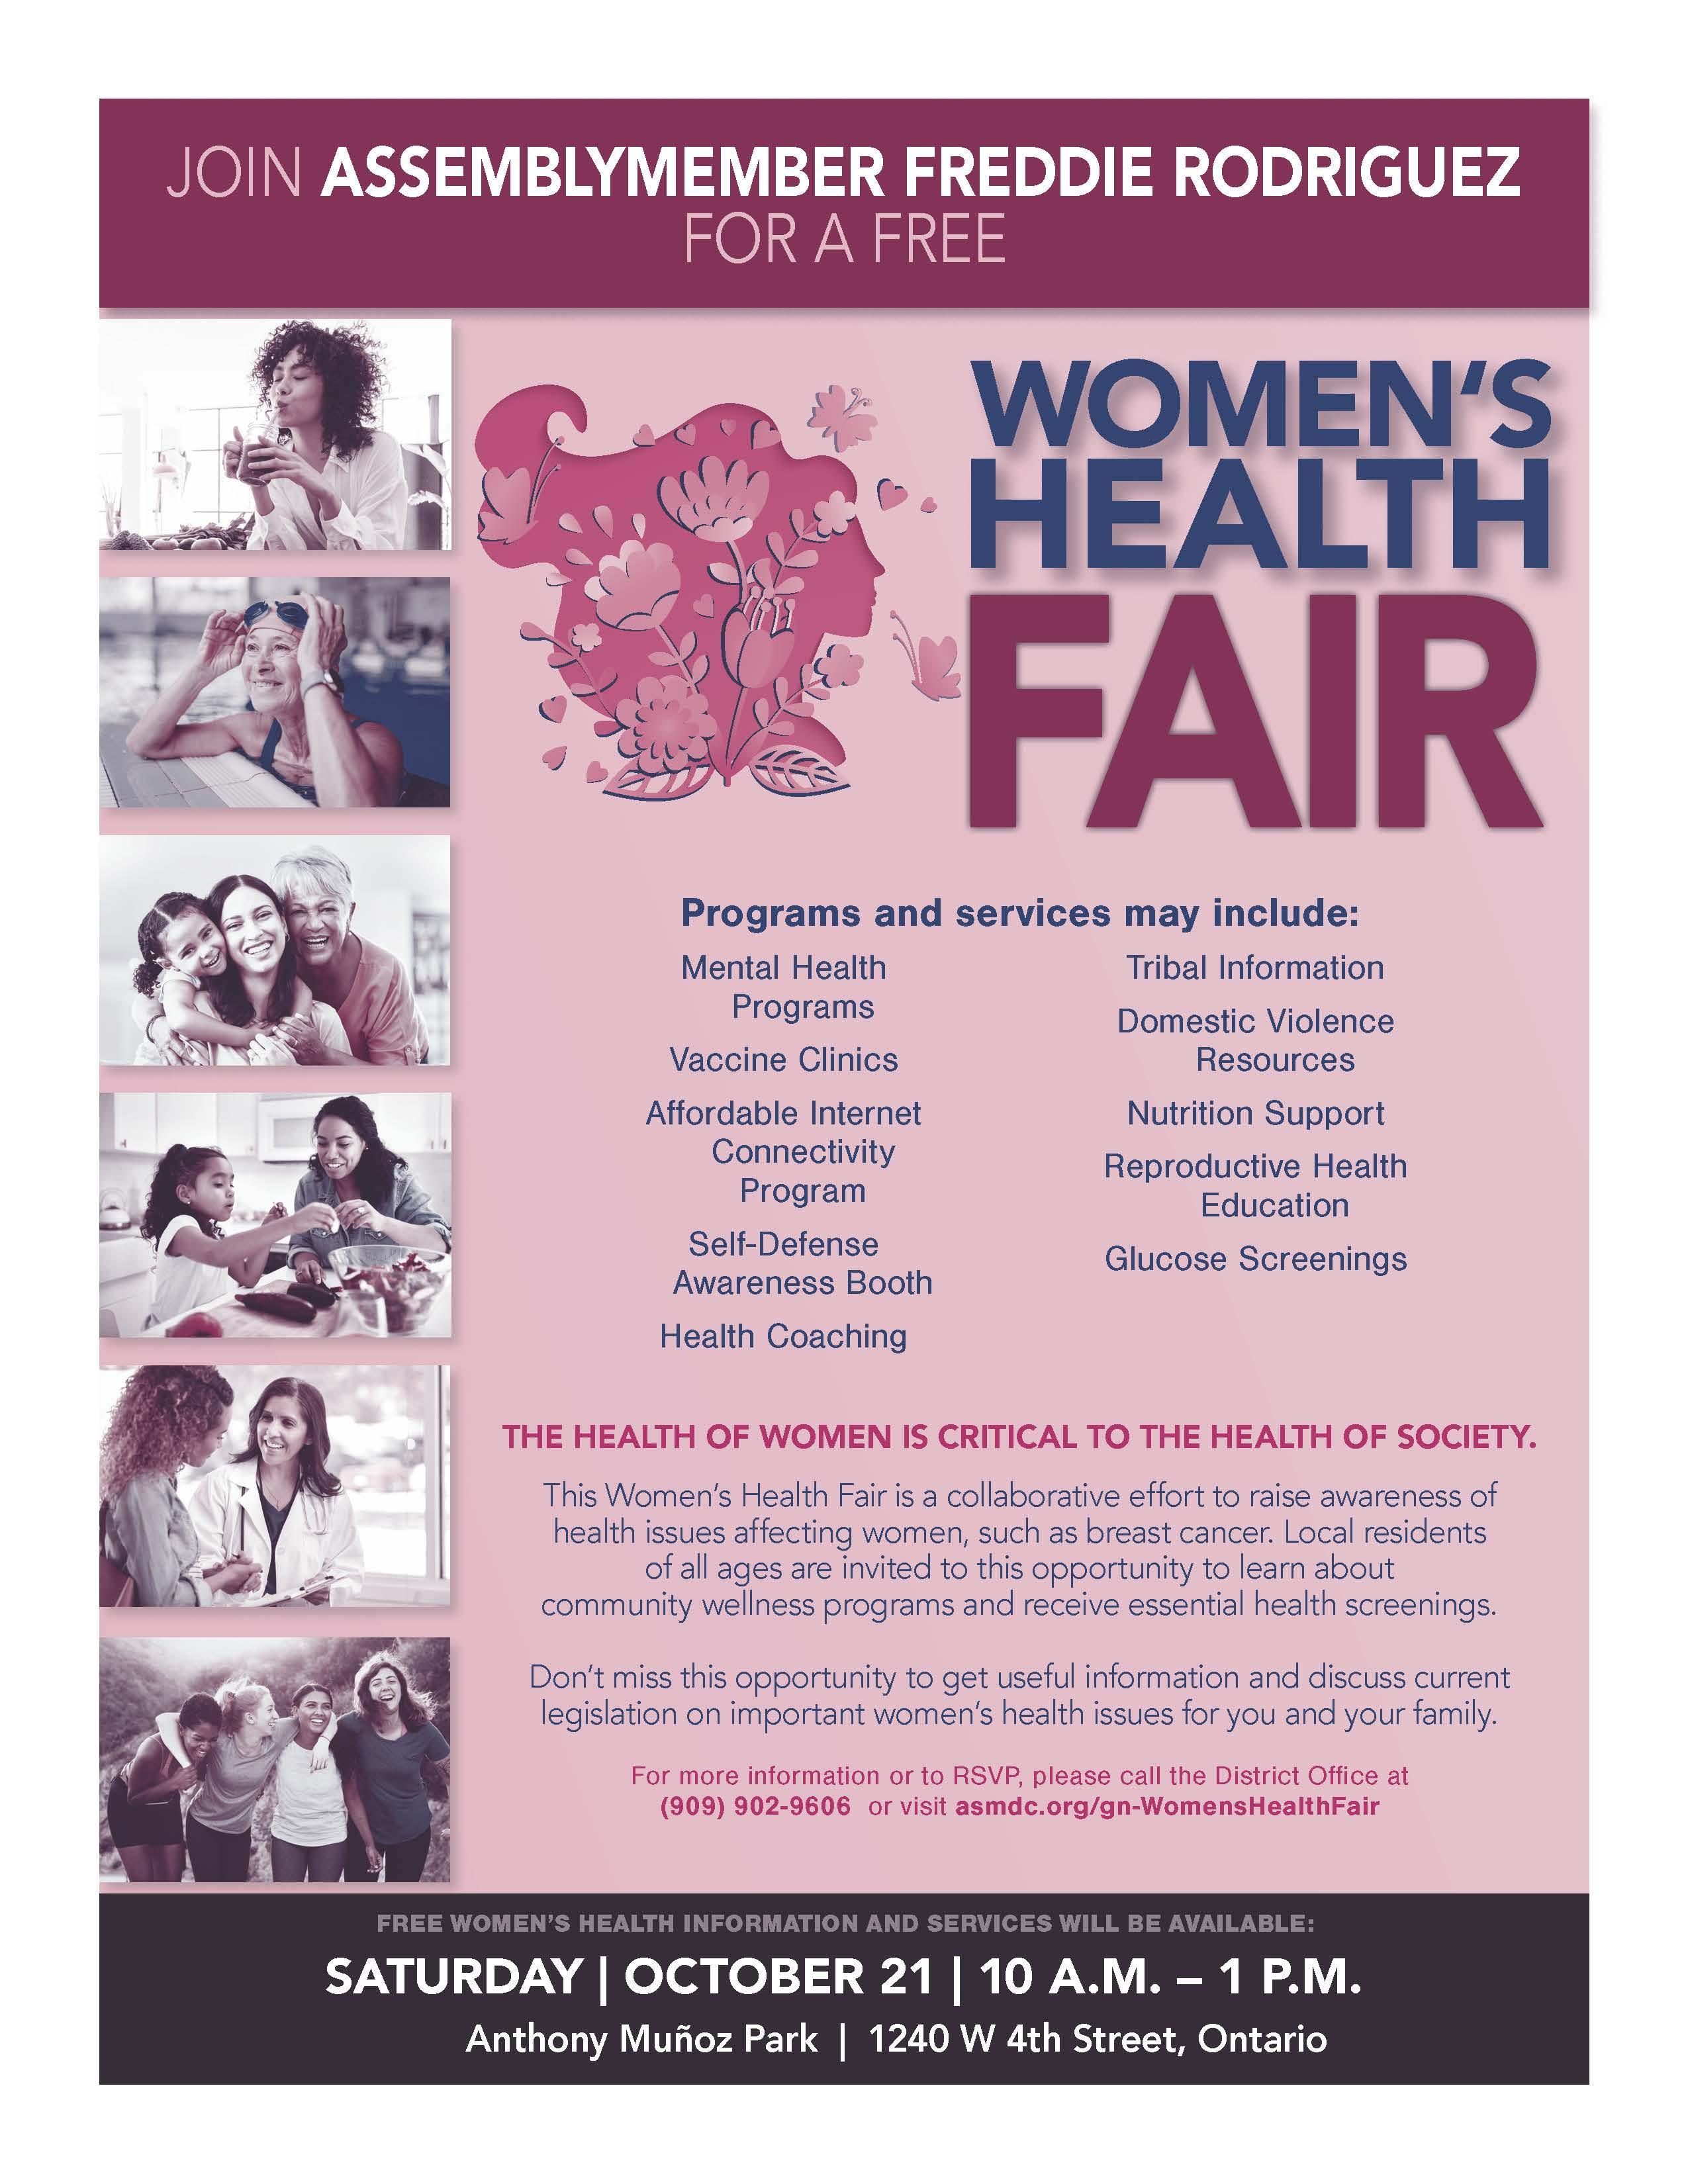 Free Women's Health Information and Services will be available! 10:00 am - 1:00 pm